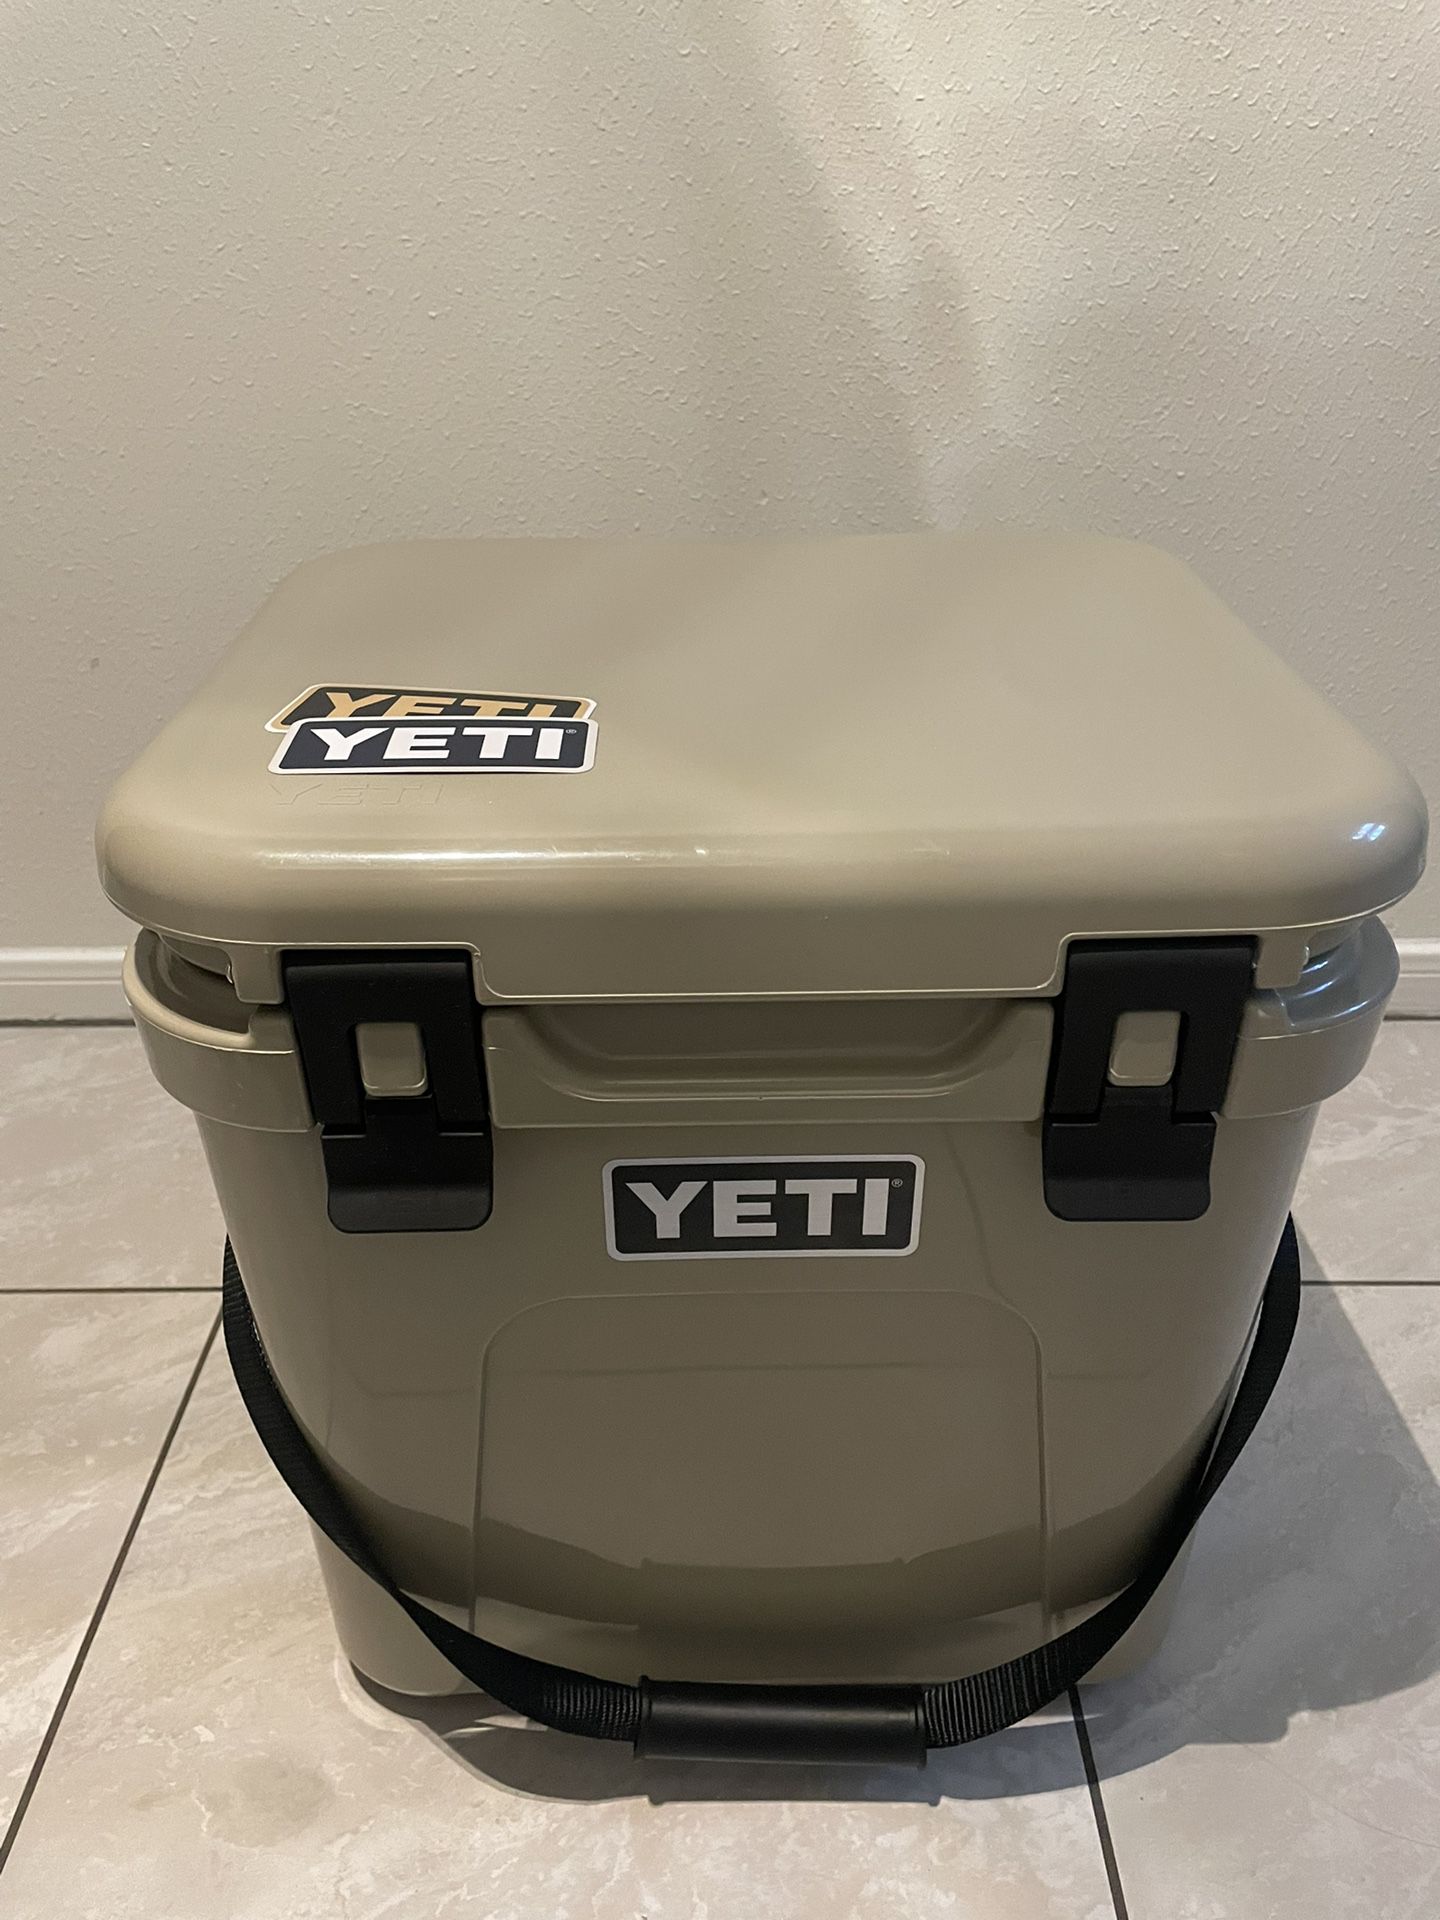 Yeti Cooler for Sale in Baytown, TX - OfferUp